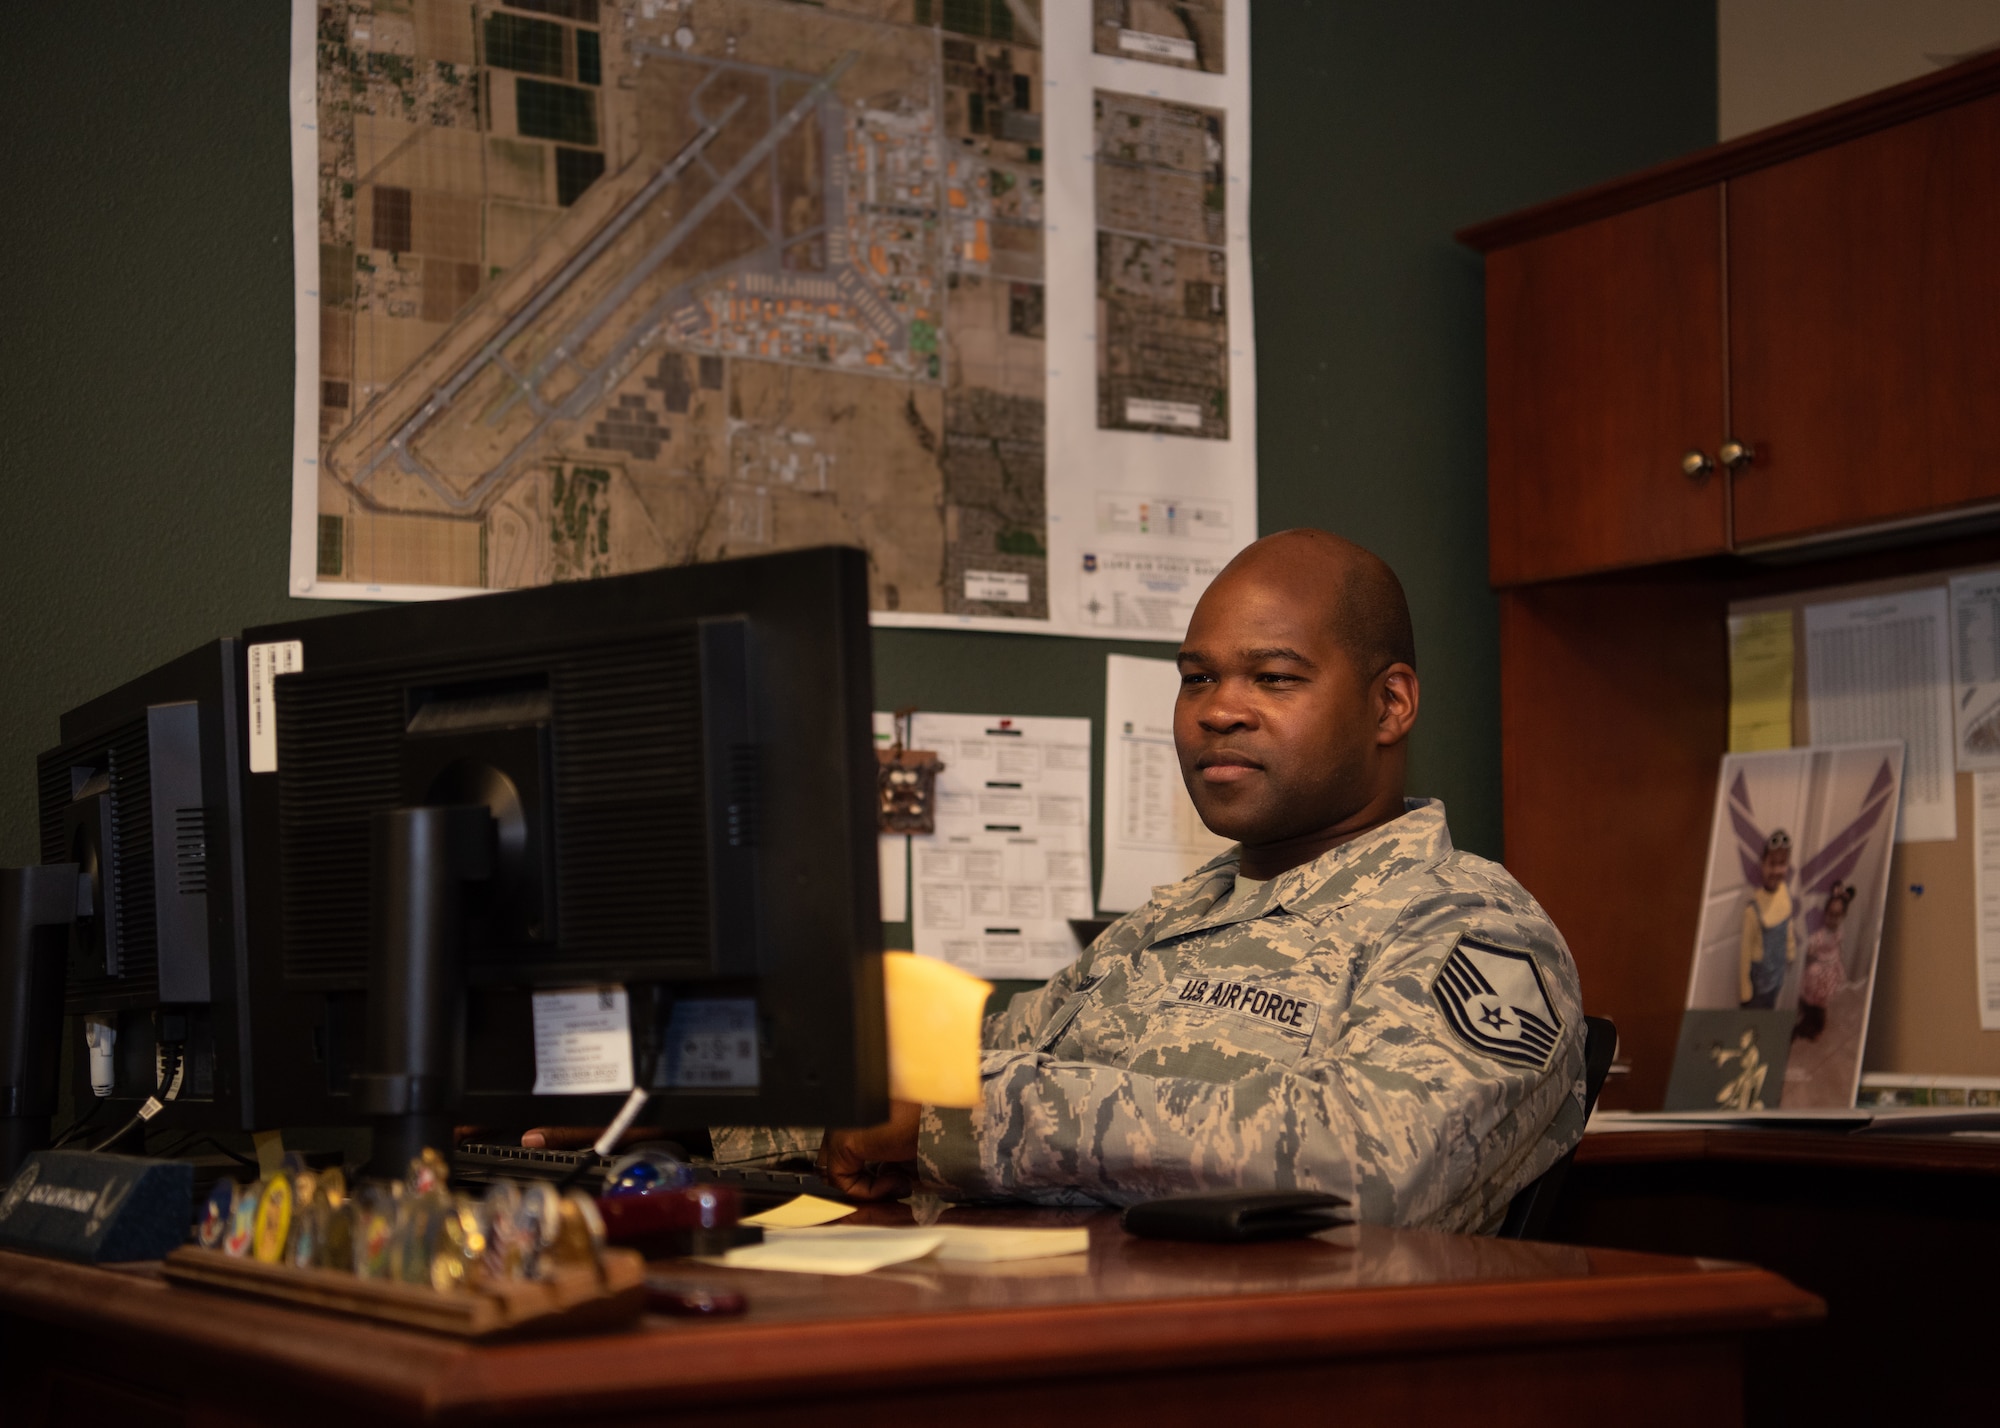 Master Sgt. Antonio Montgomery, 56th Fighter Wing Flight Safety Office flight safety noncommissioned officer, finishes a safety report July 9, 2019, at Luke Air Force Base, Ariz. The flight safety office oversees the safety of the operations on the flightline, including the Airmen, aircraft and runway, ensuring the day-to-day operations are not hindered. (U.S. Air Force photo by Airman 1st Class Aspen Reid)